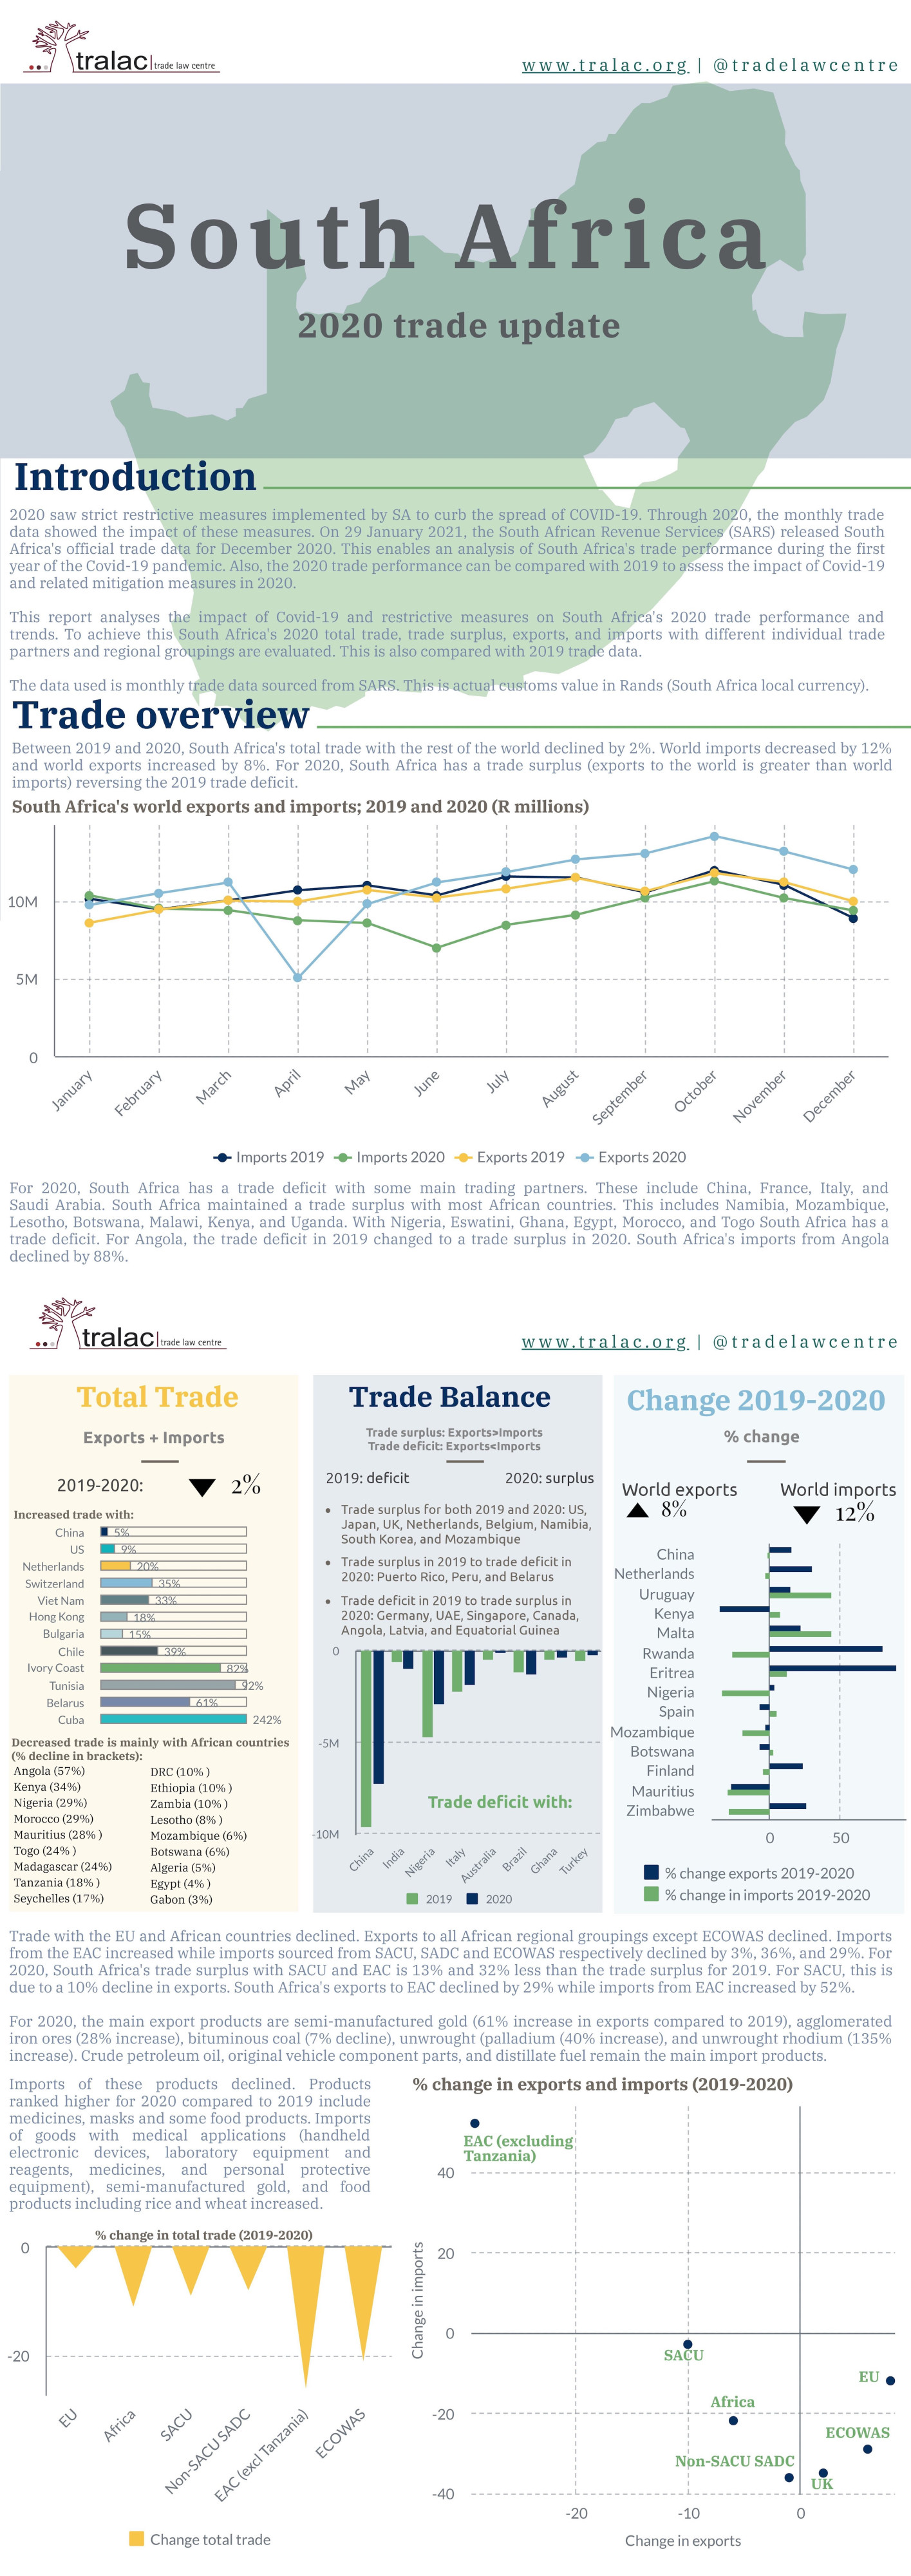 South Africa: 2020 trade update